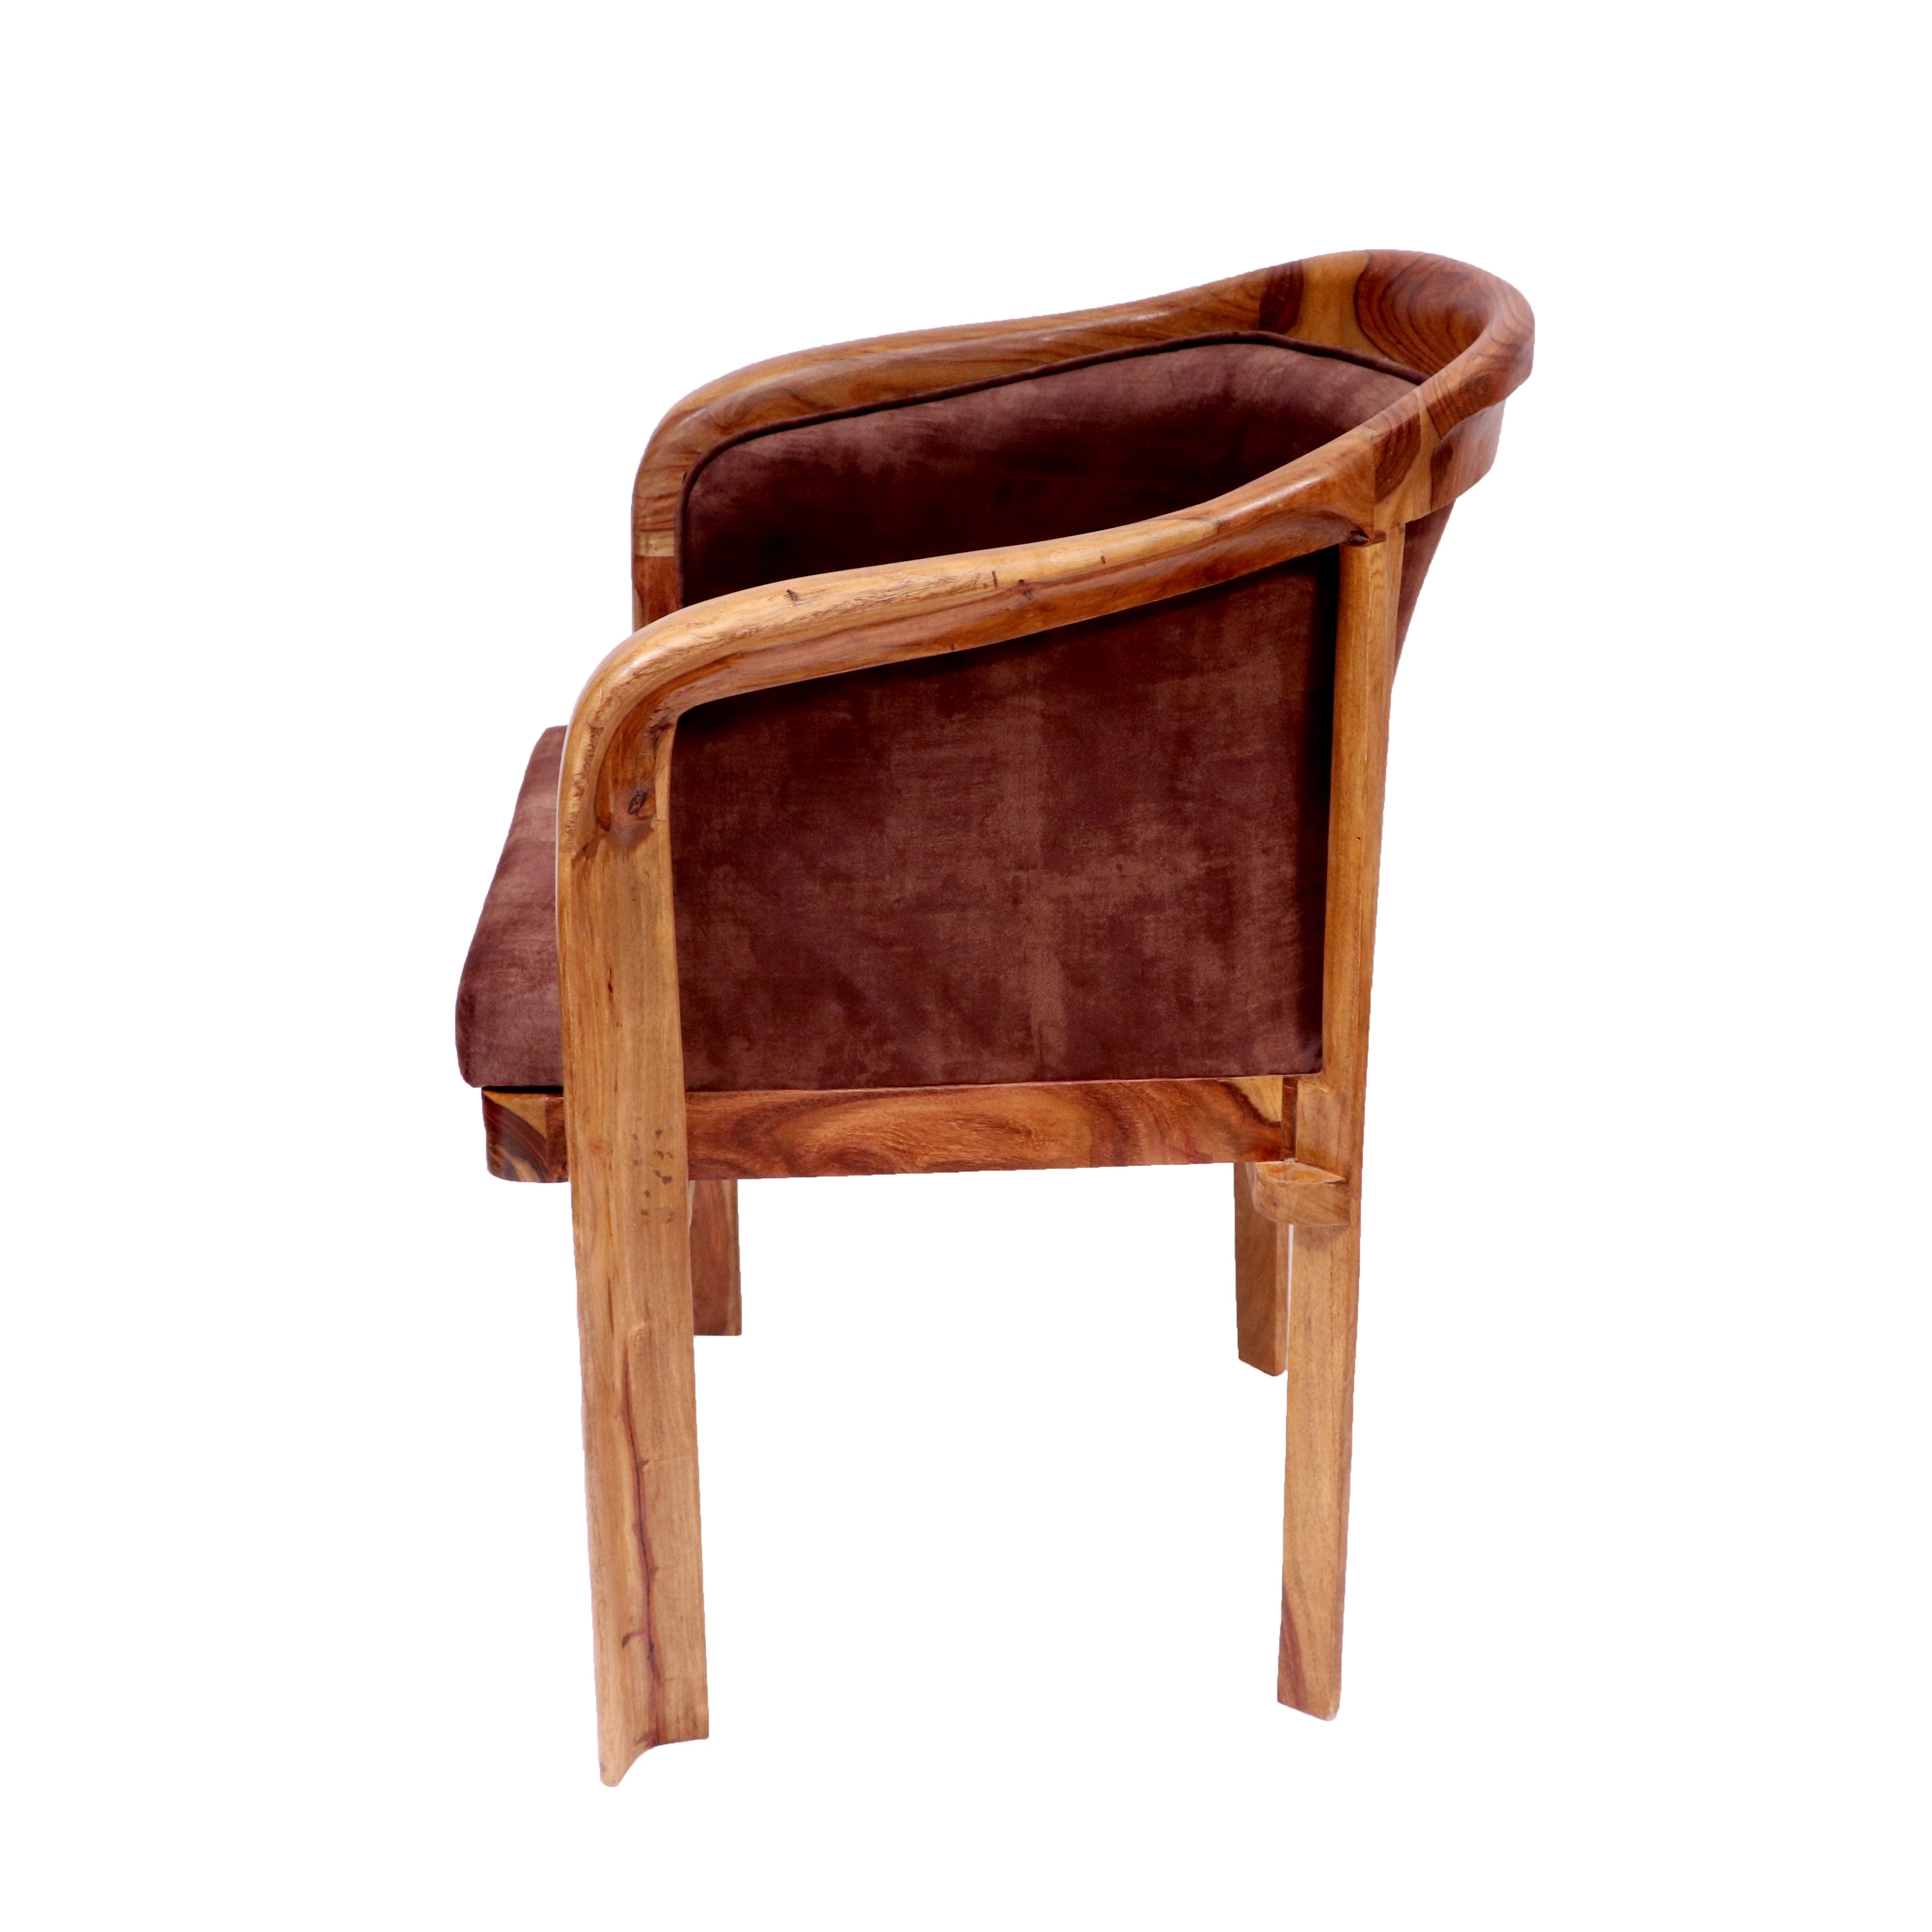 Sheesham wood Comfy upholstered Chair Arm Chair